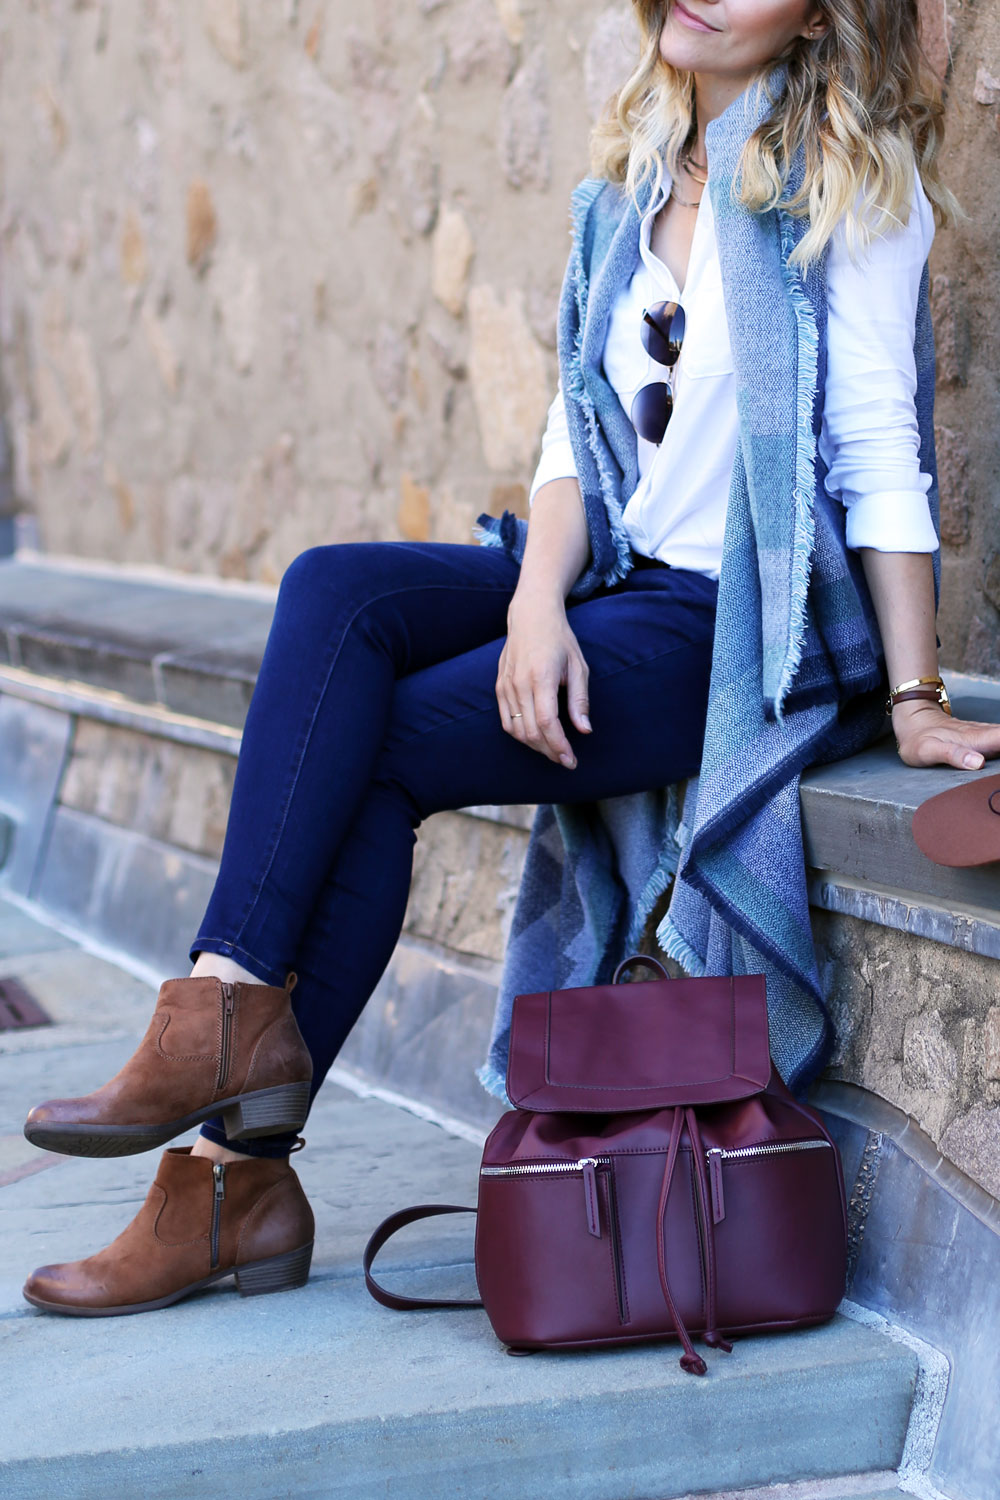 Pair a sweater vest with a basic top, skinny jeans and ankle boots for a cool back-to-school outfit from Kohl's.